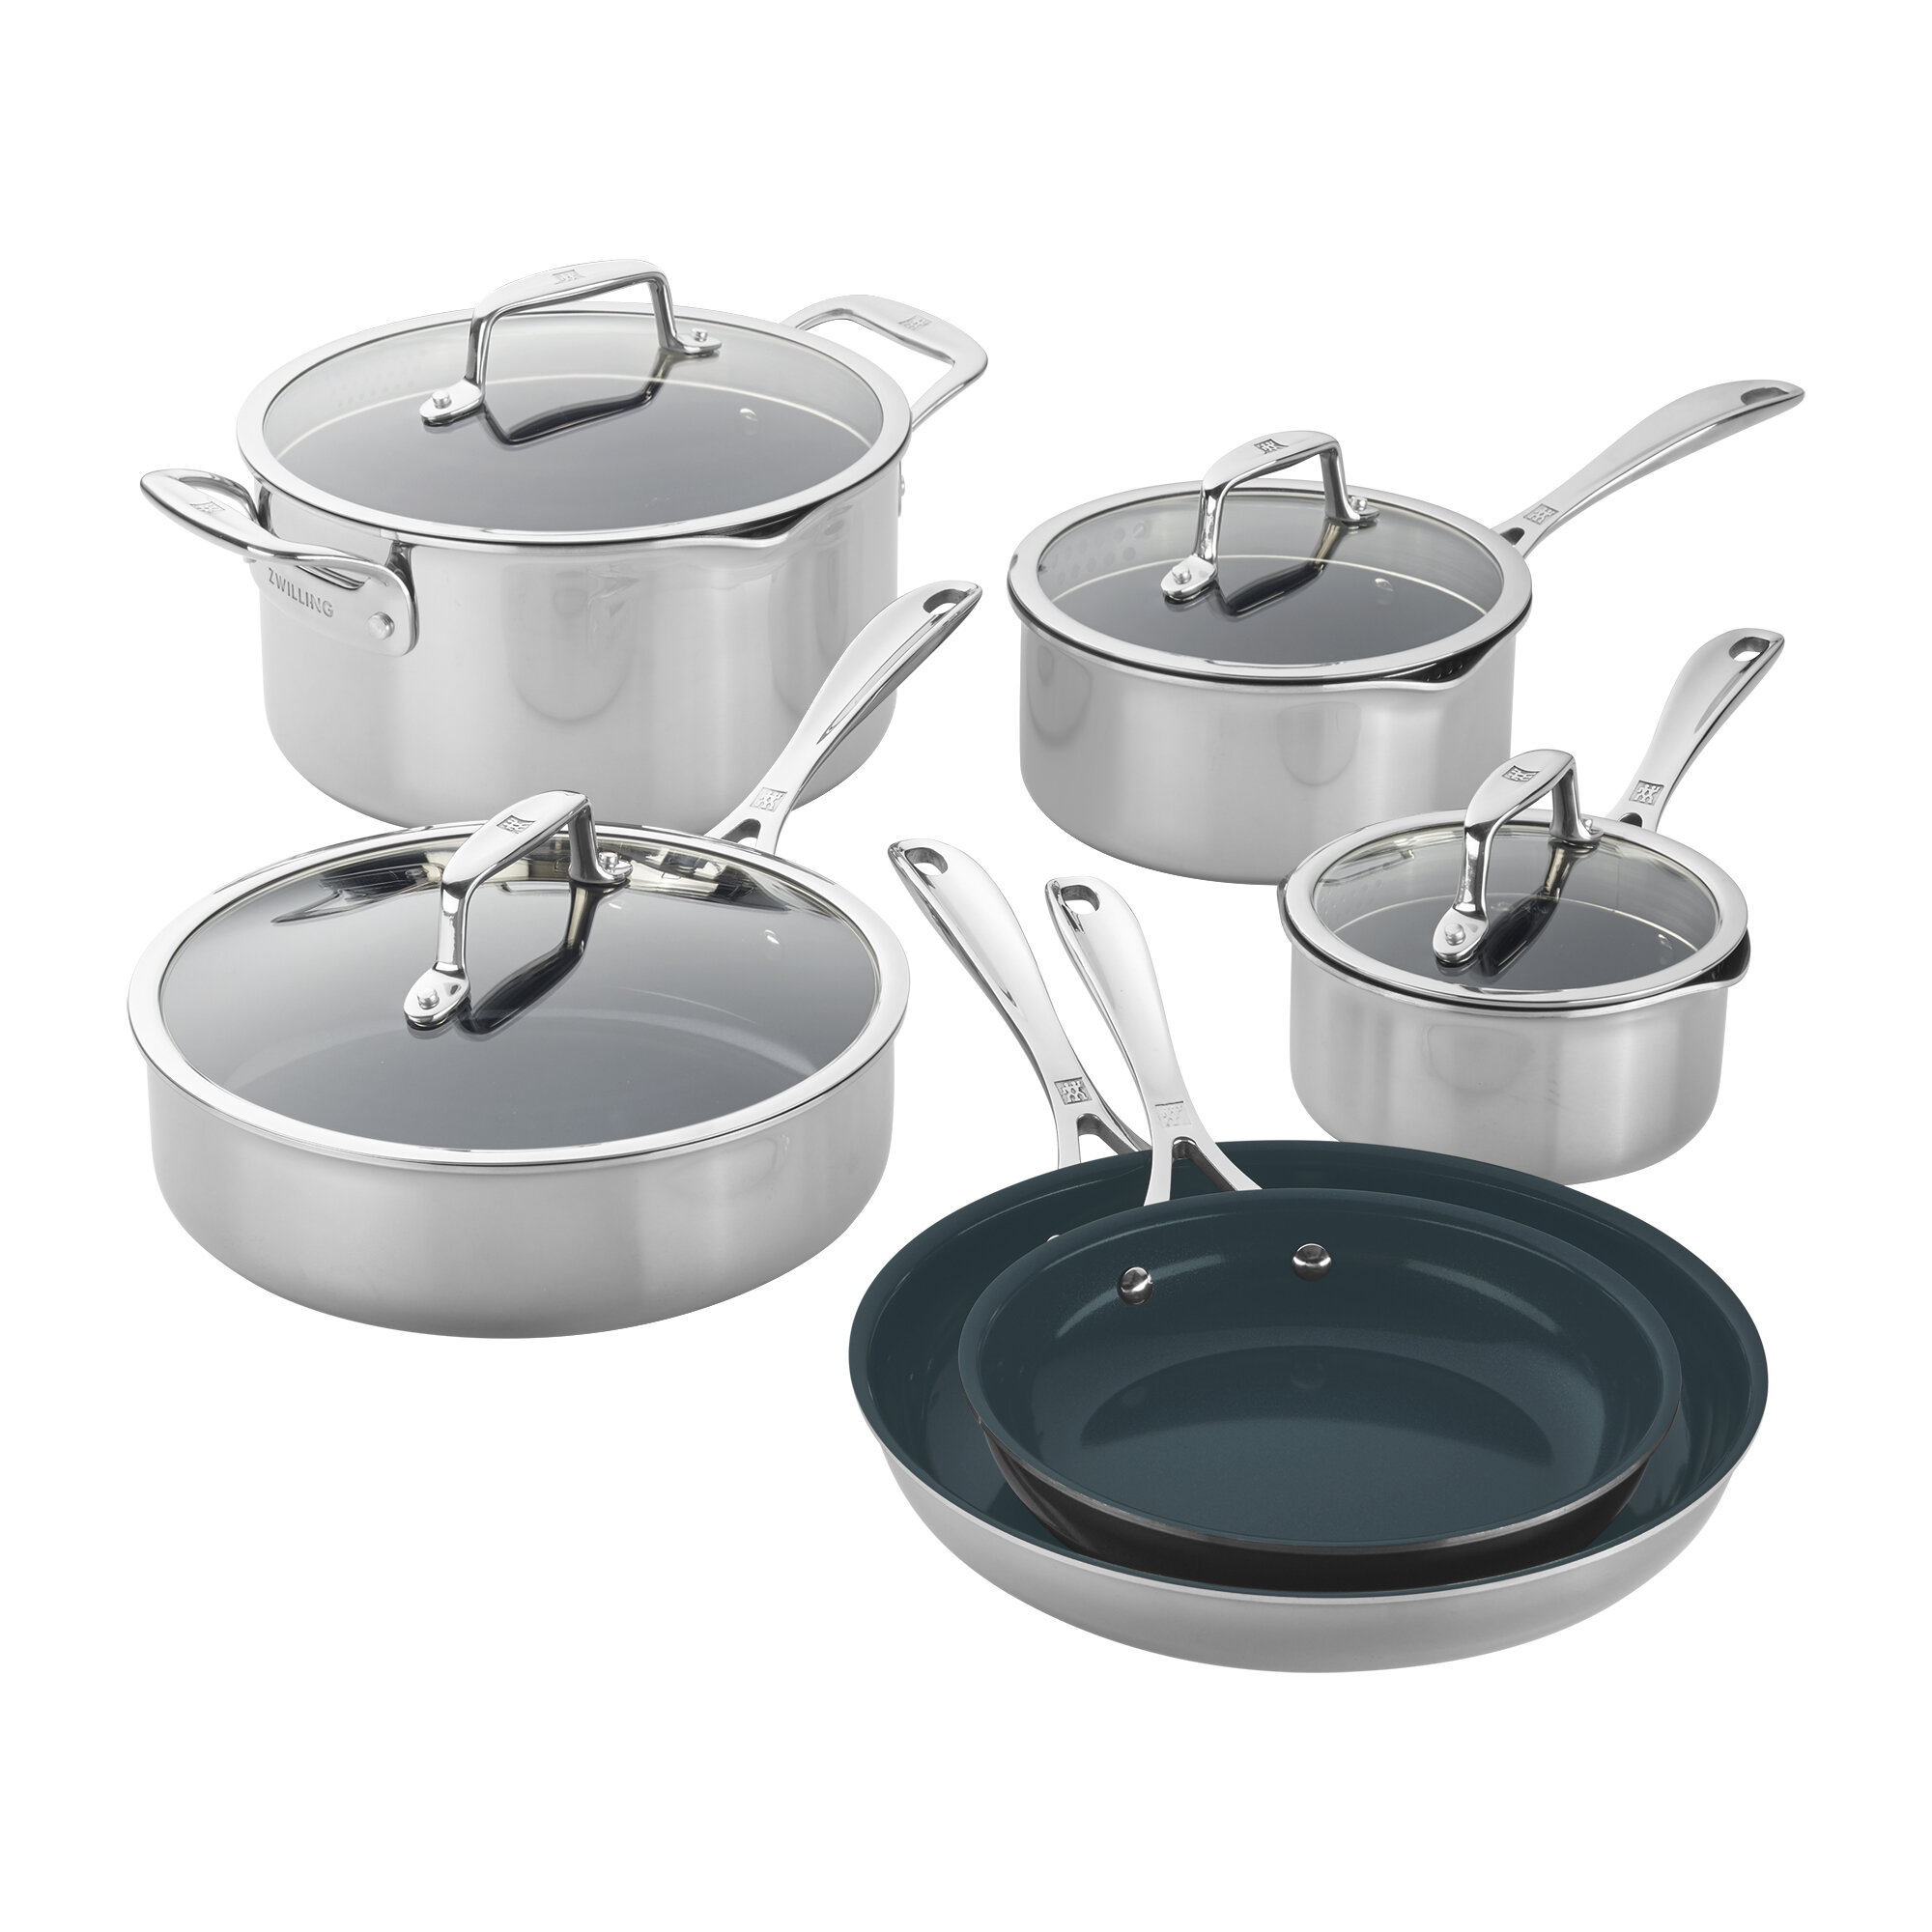 ZWILLING J.A. Henckels Zwilling Clad CFX 7-piece Stainless Steel Ceramic  Nonstick Cookware Set & Reviews